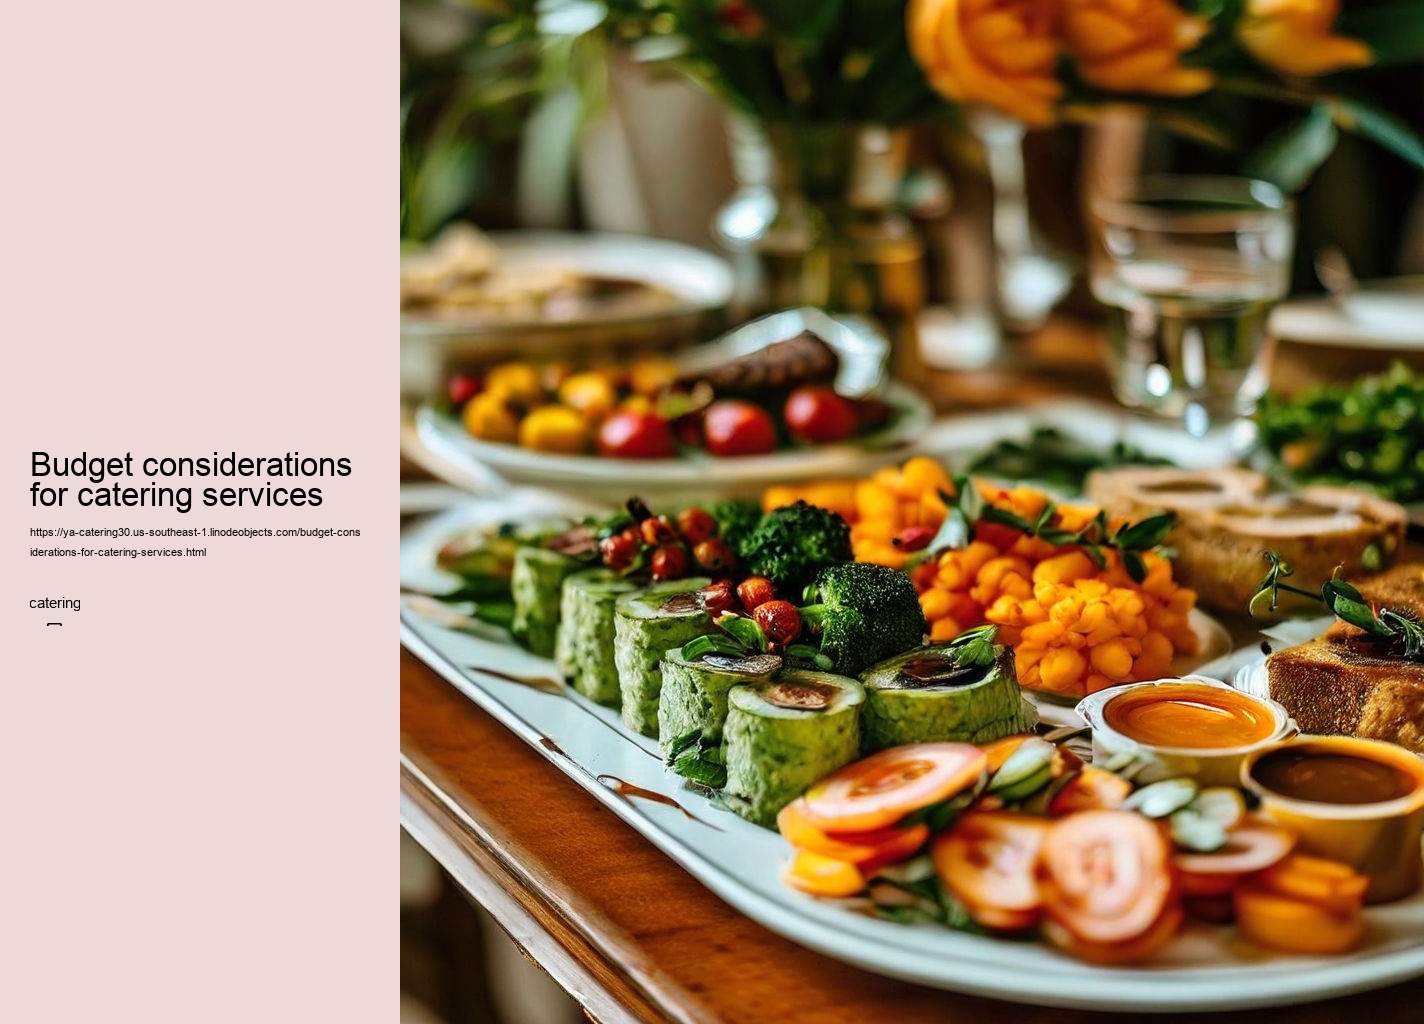 Budget considerations for catering services